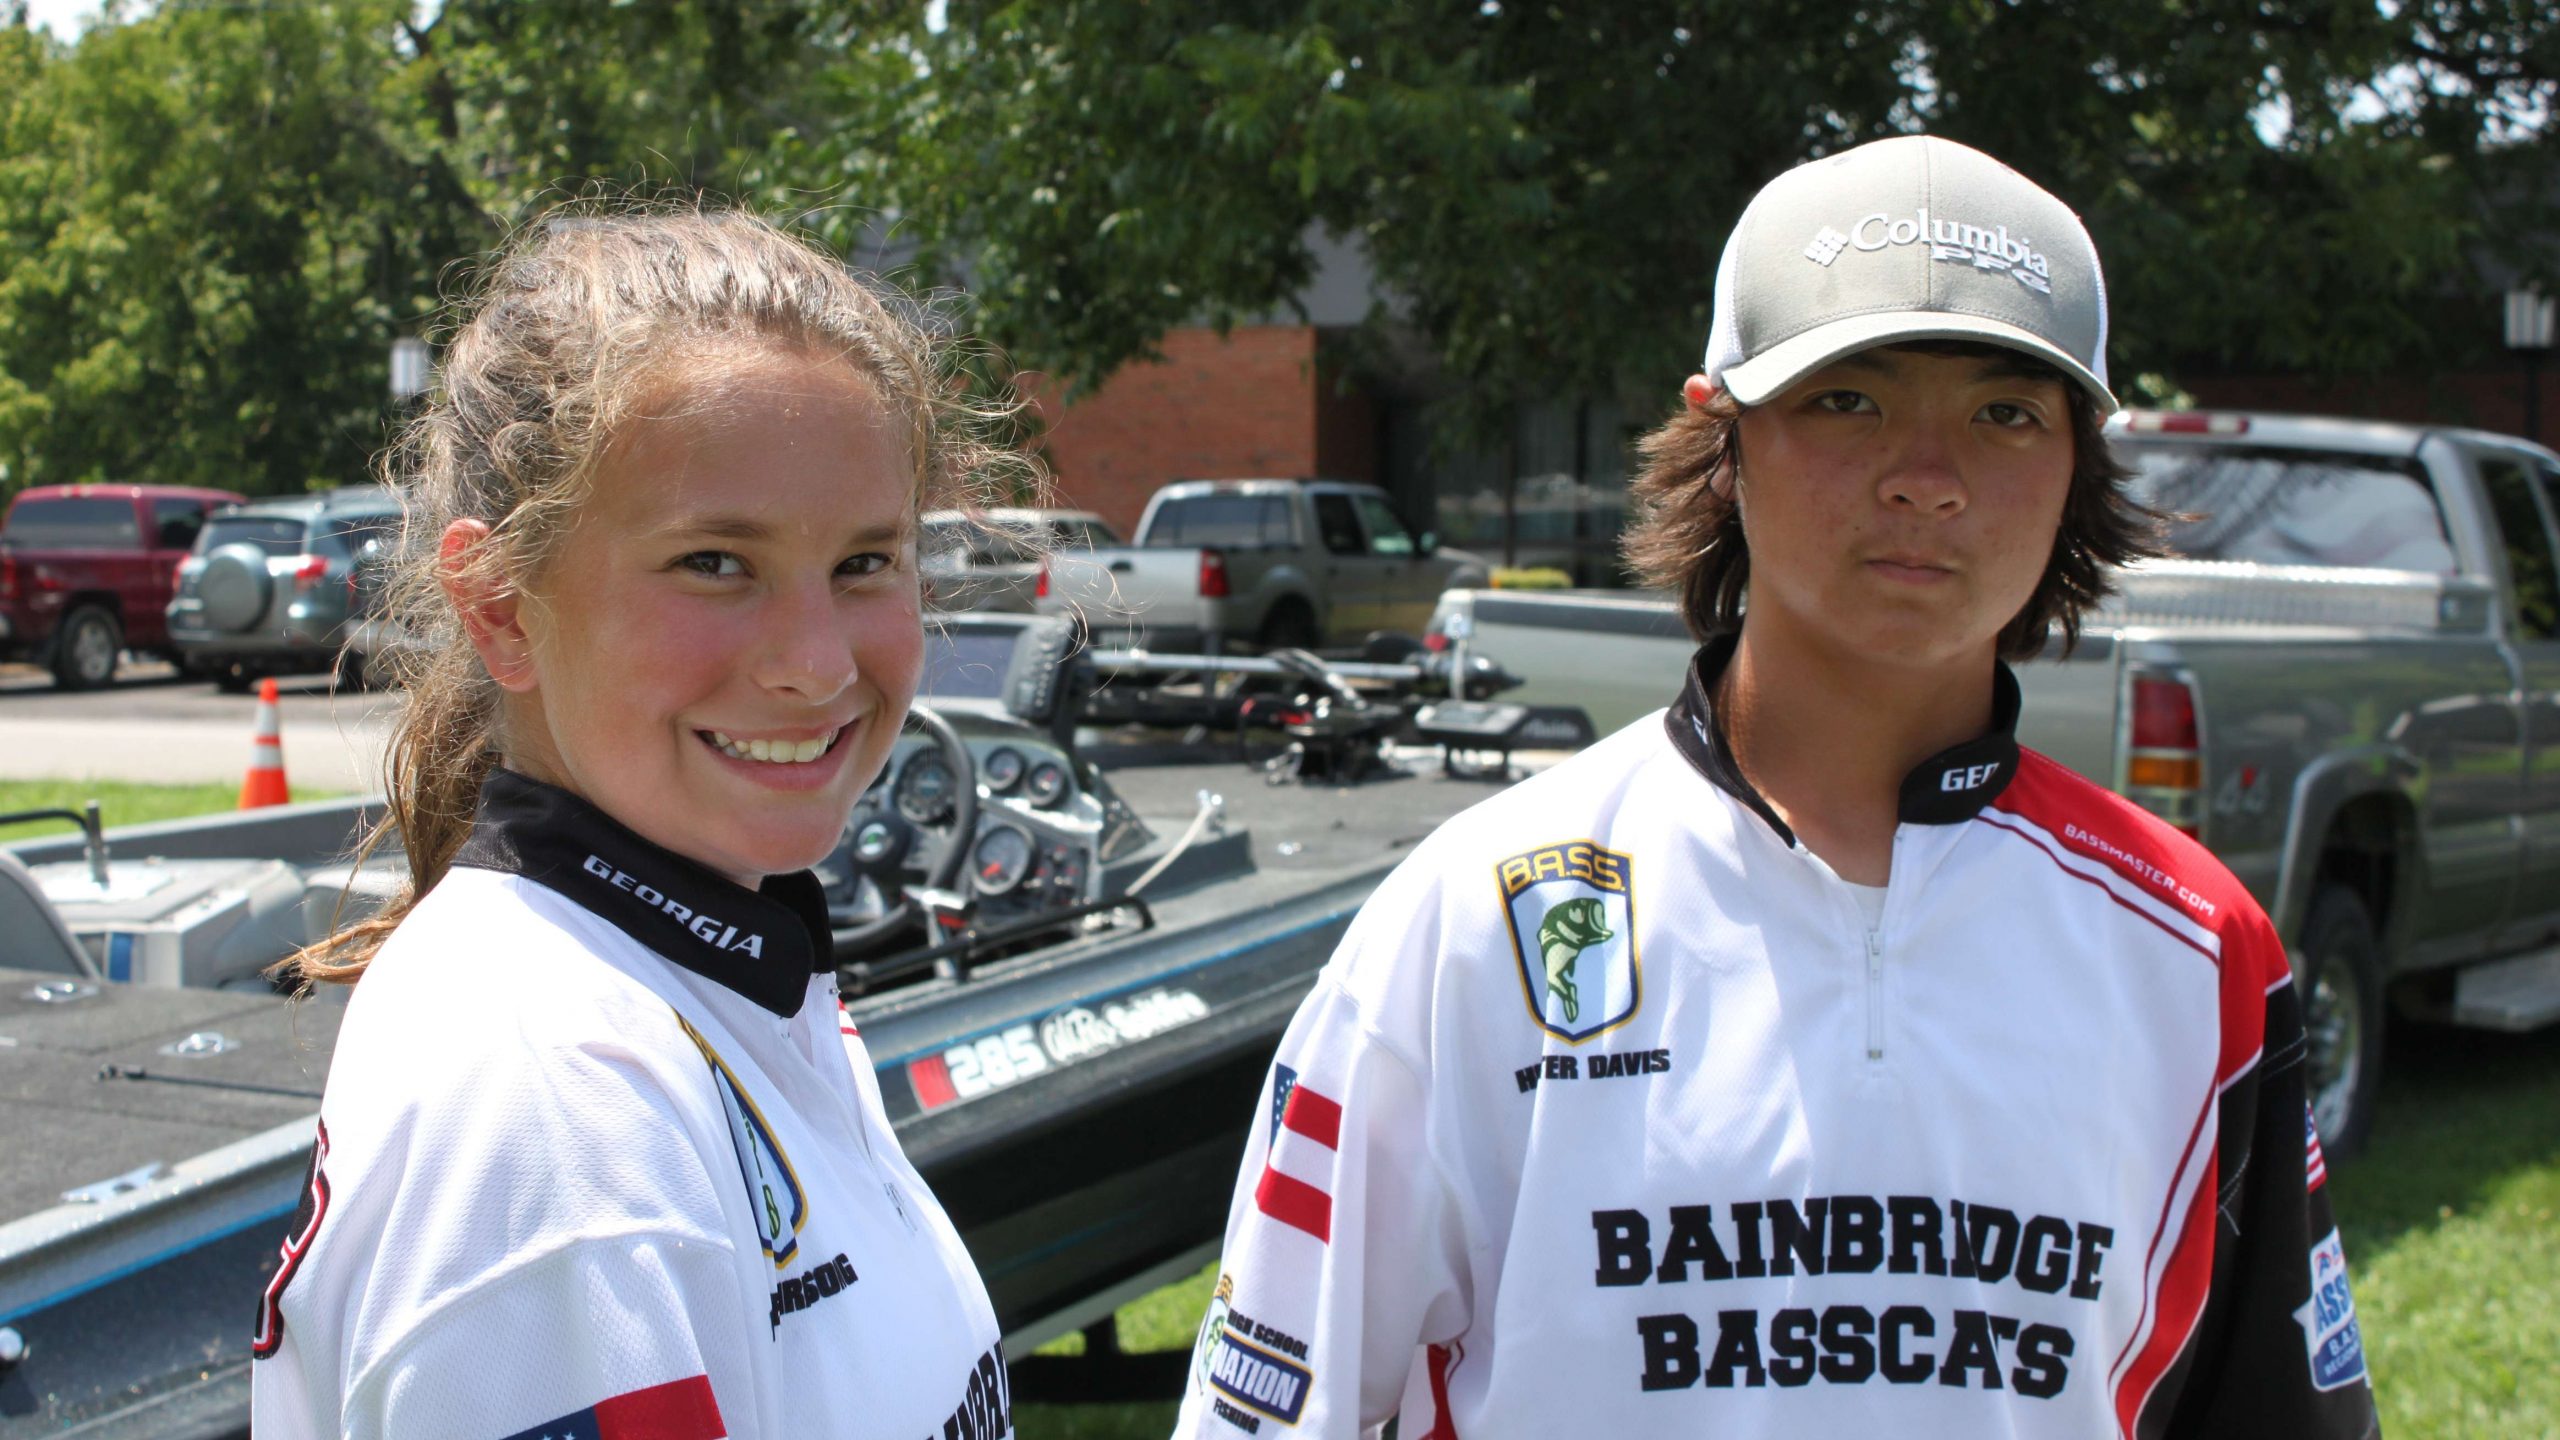 Lanie Birdsong and Hunter Davis of Team Georgia smile before unloading their boat and heading to the weigh-in stage.